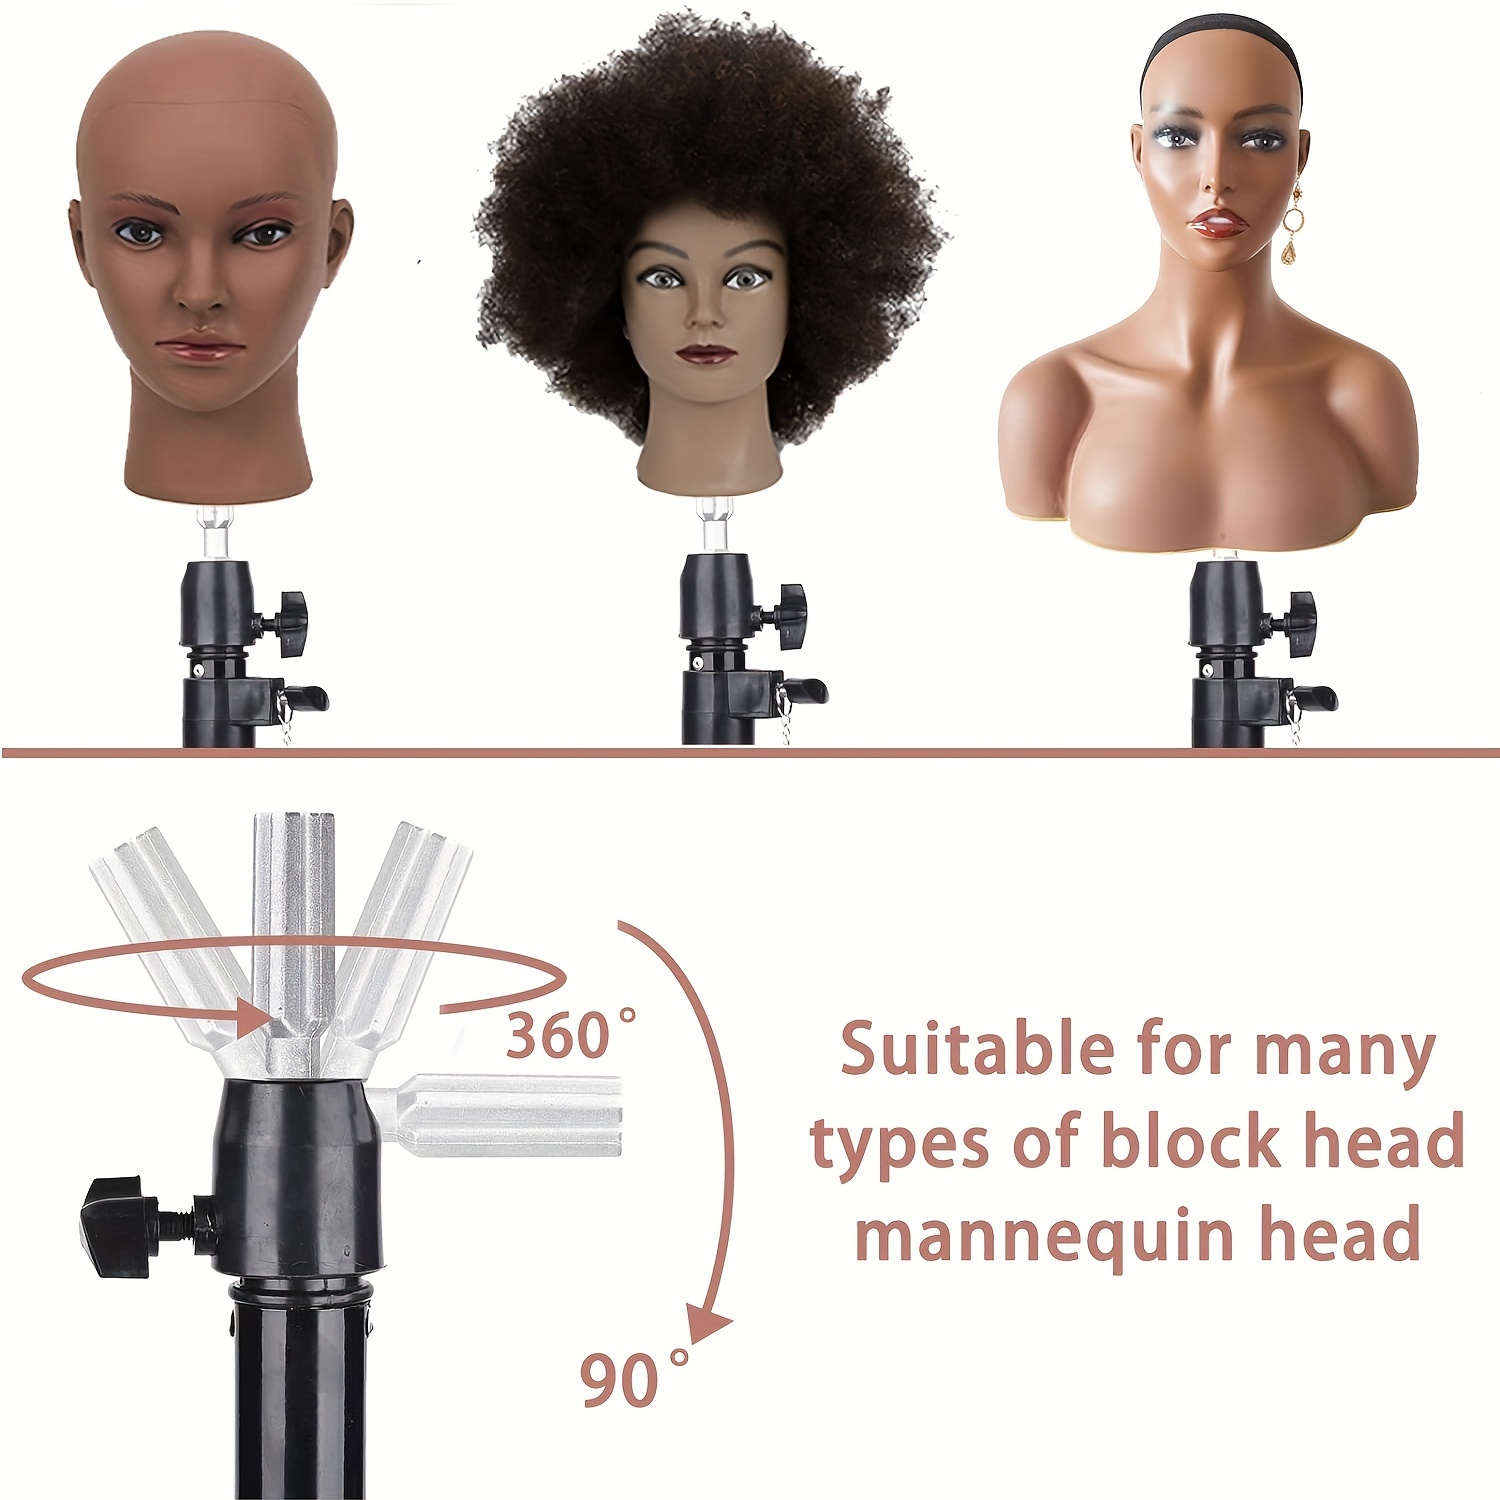 Mannequin Manikin Head Tripod Adjustable Wig Tripod Stand Holder For Wigs  Heads Hairdressing Training Head Wig Making Tools